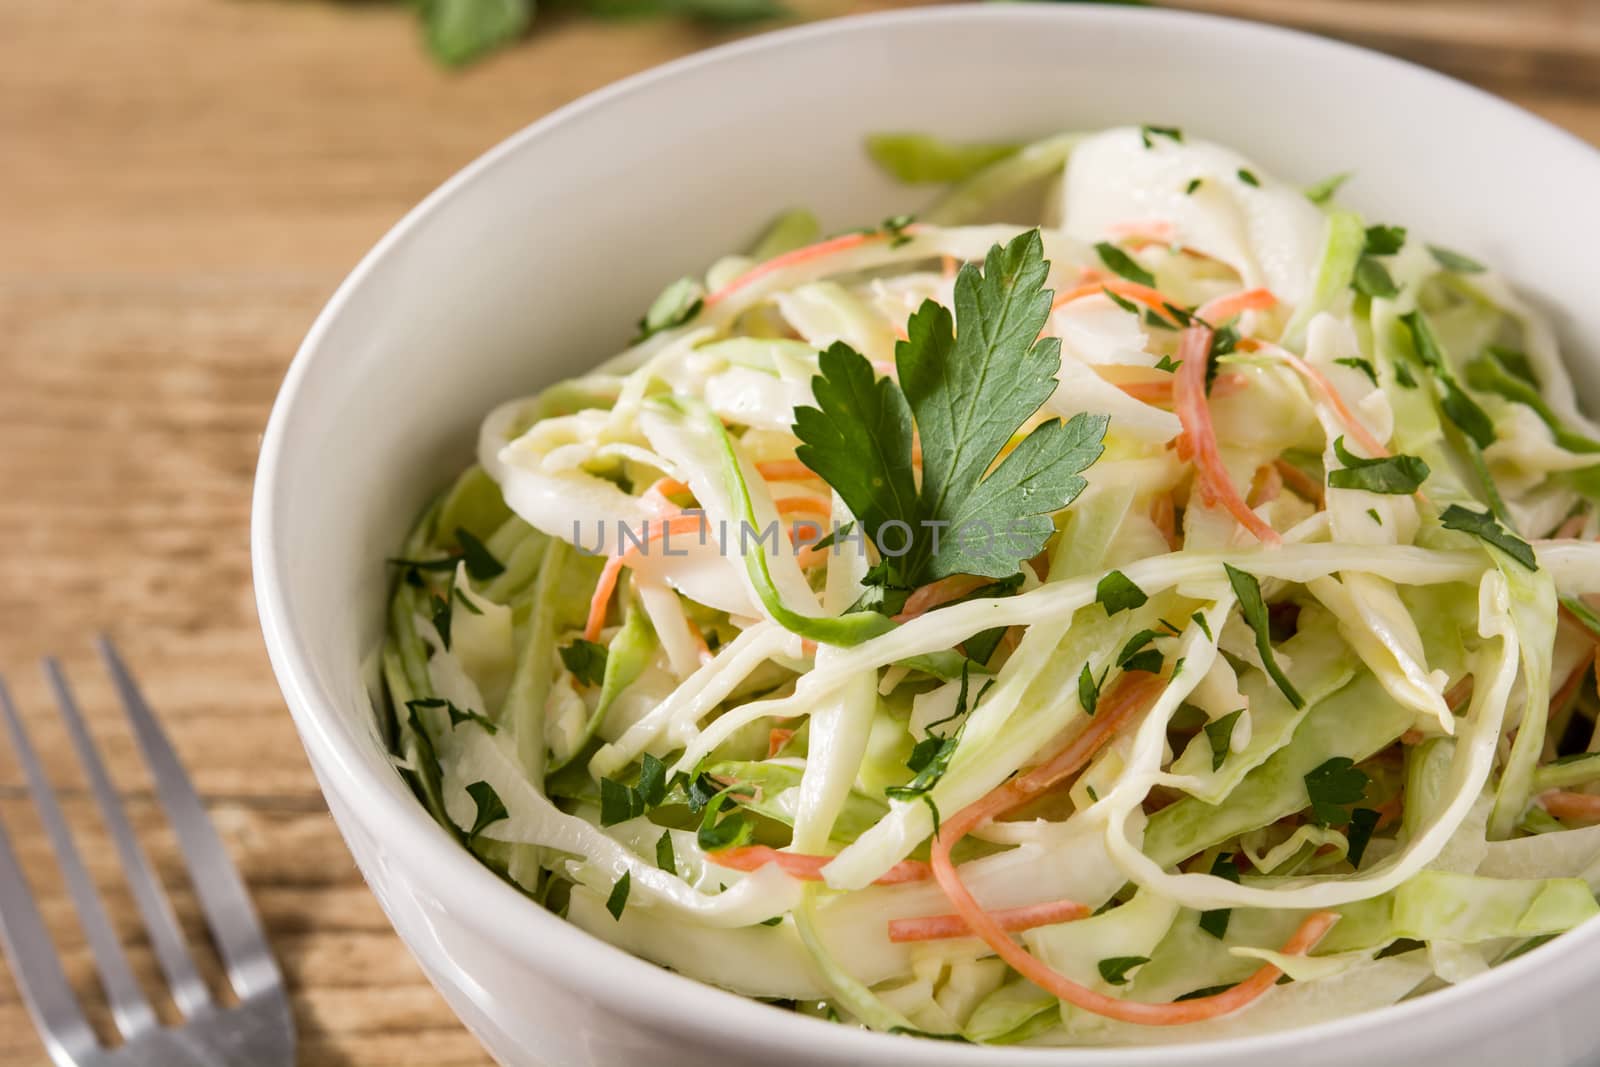 Coleslaw salad in white bowl by chandlervid85